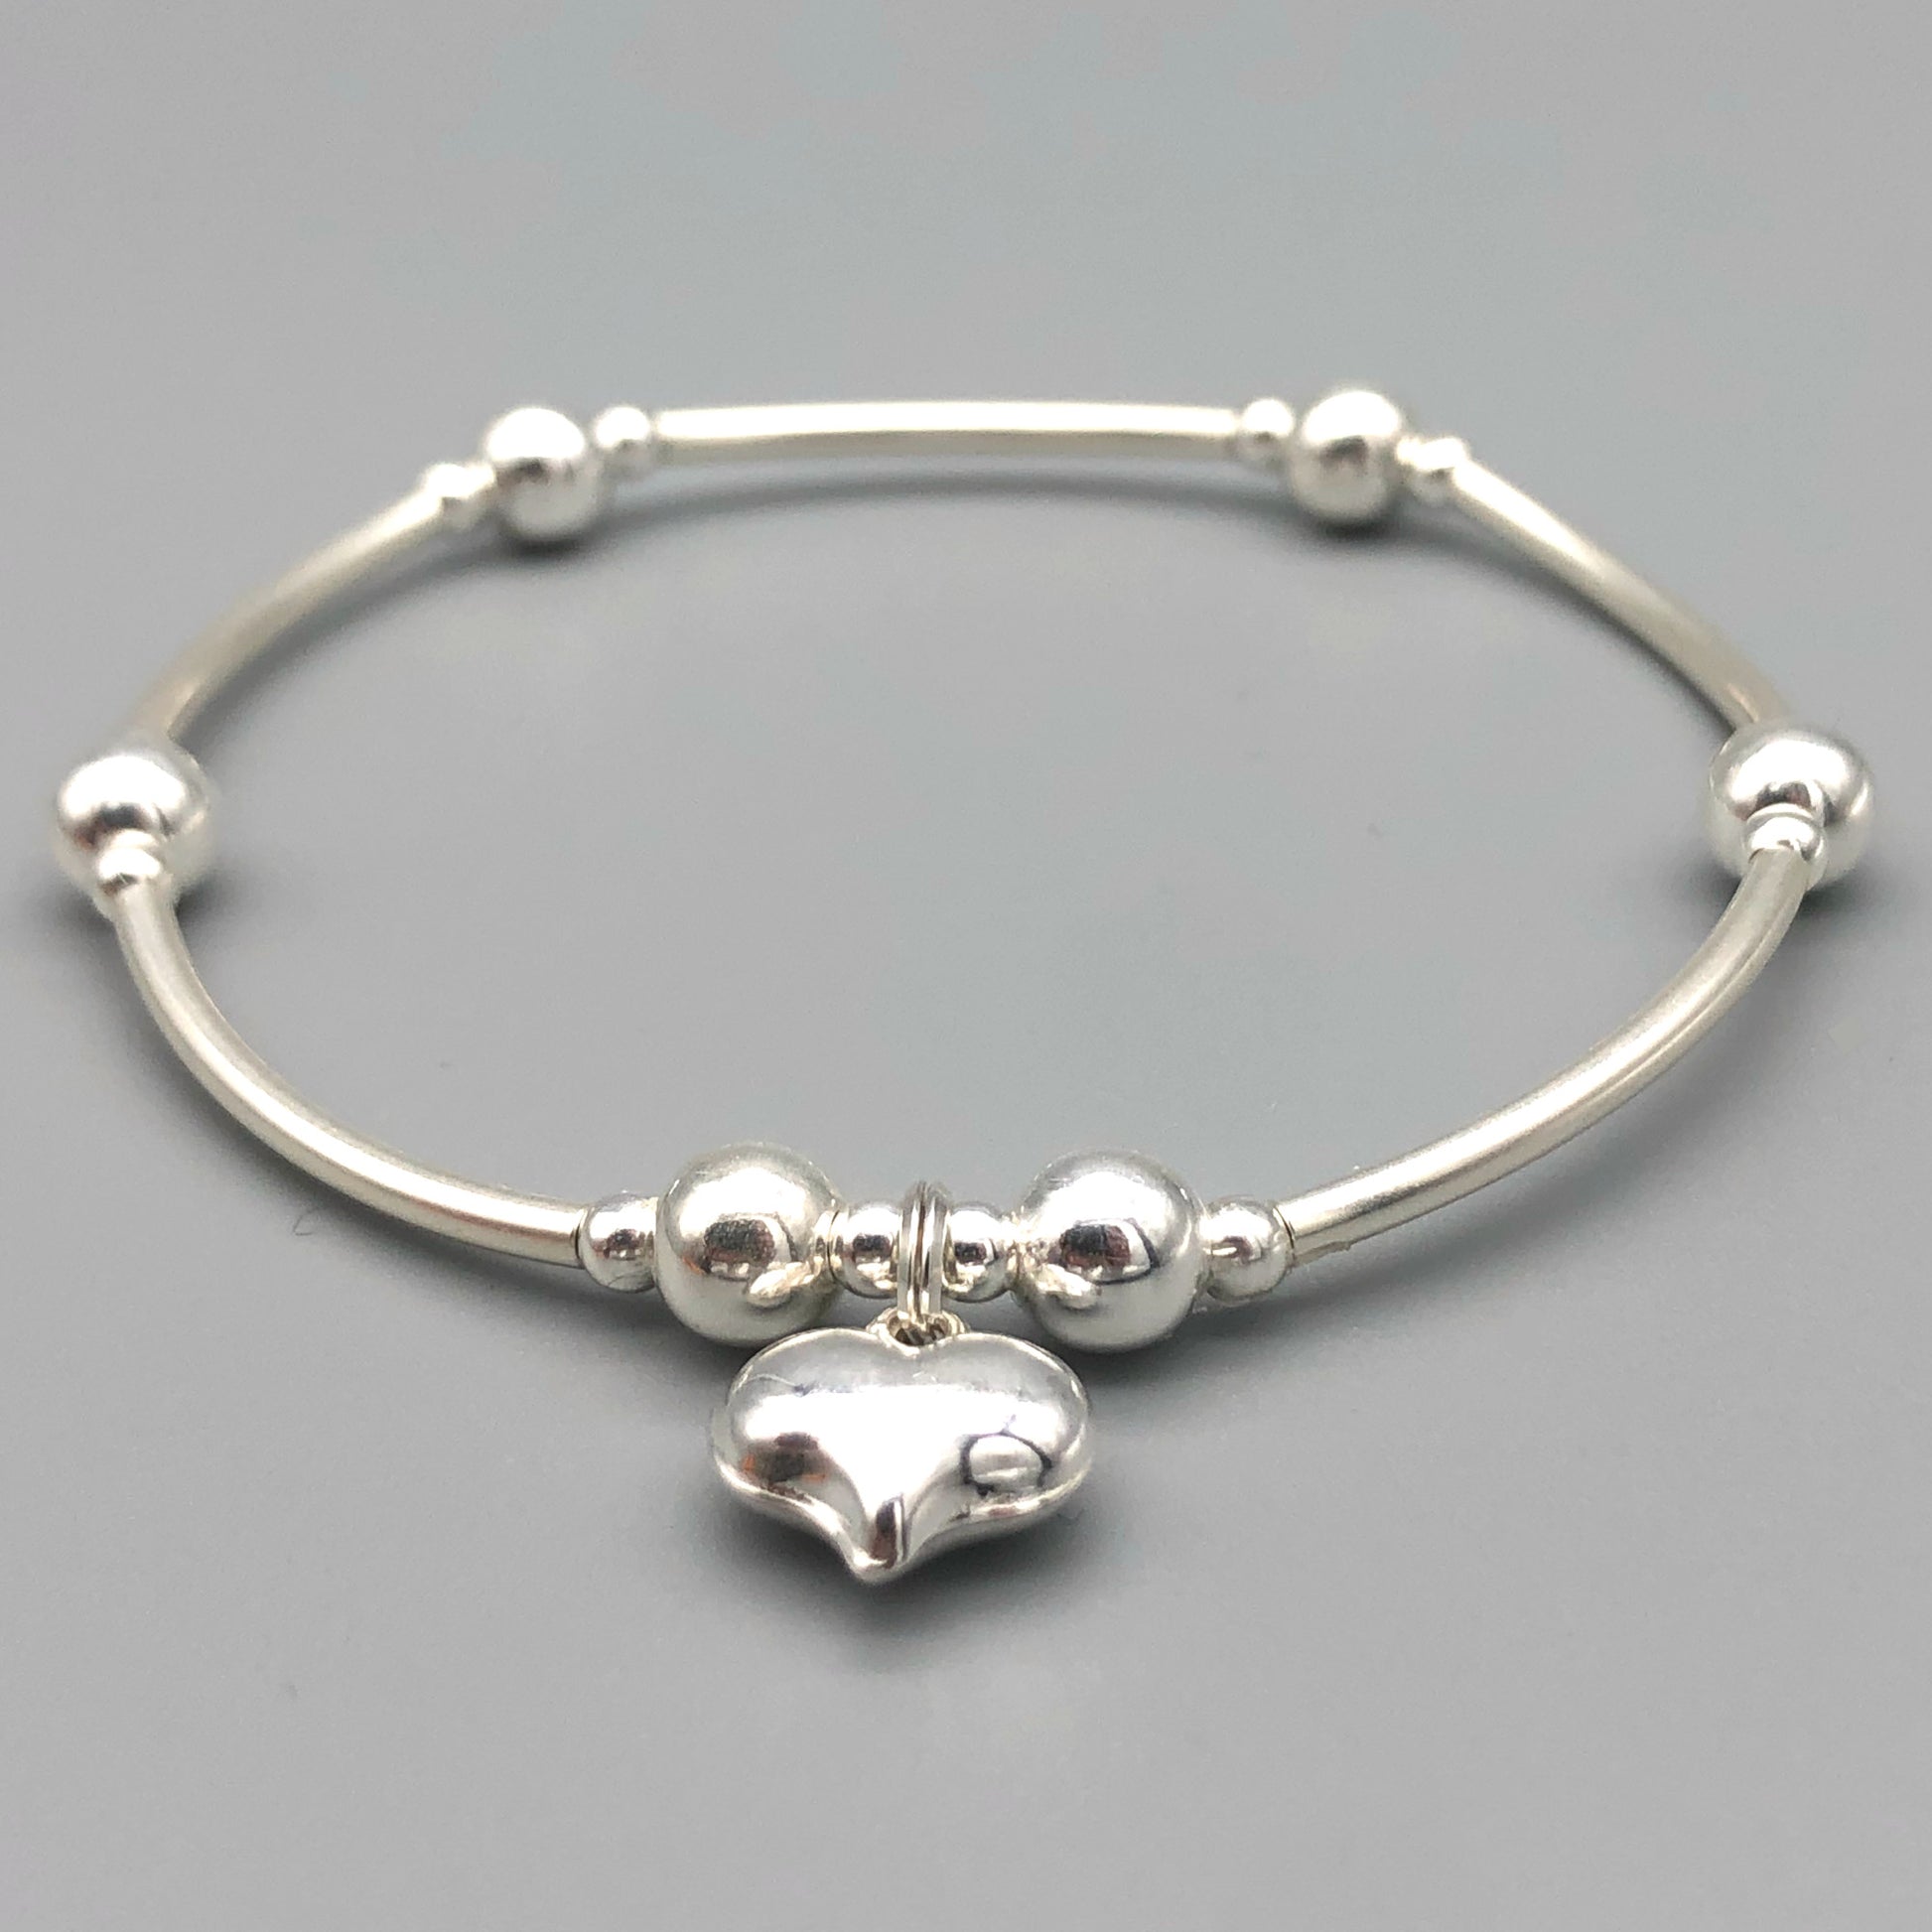 Puff heart charm sterling silver hand-made girl's stacking bracelet by My Silver Wish